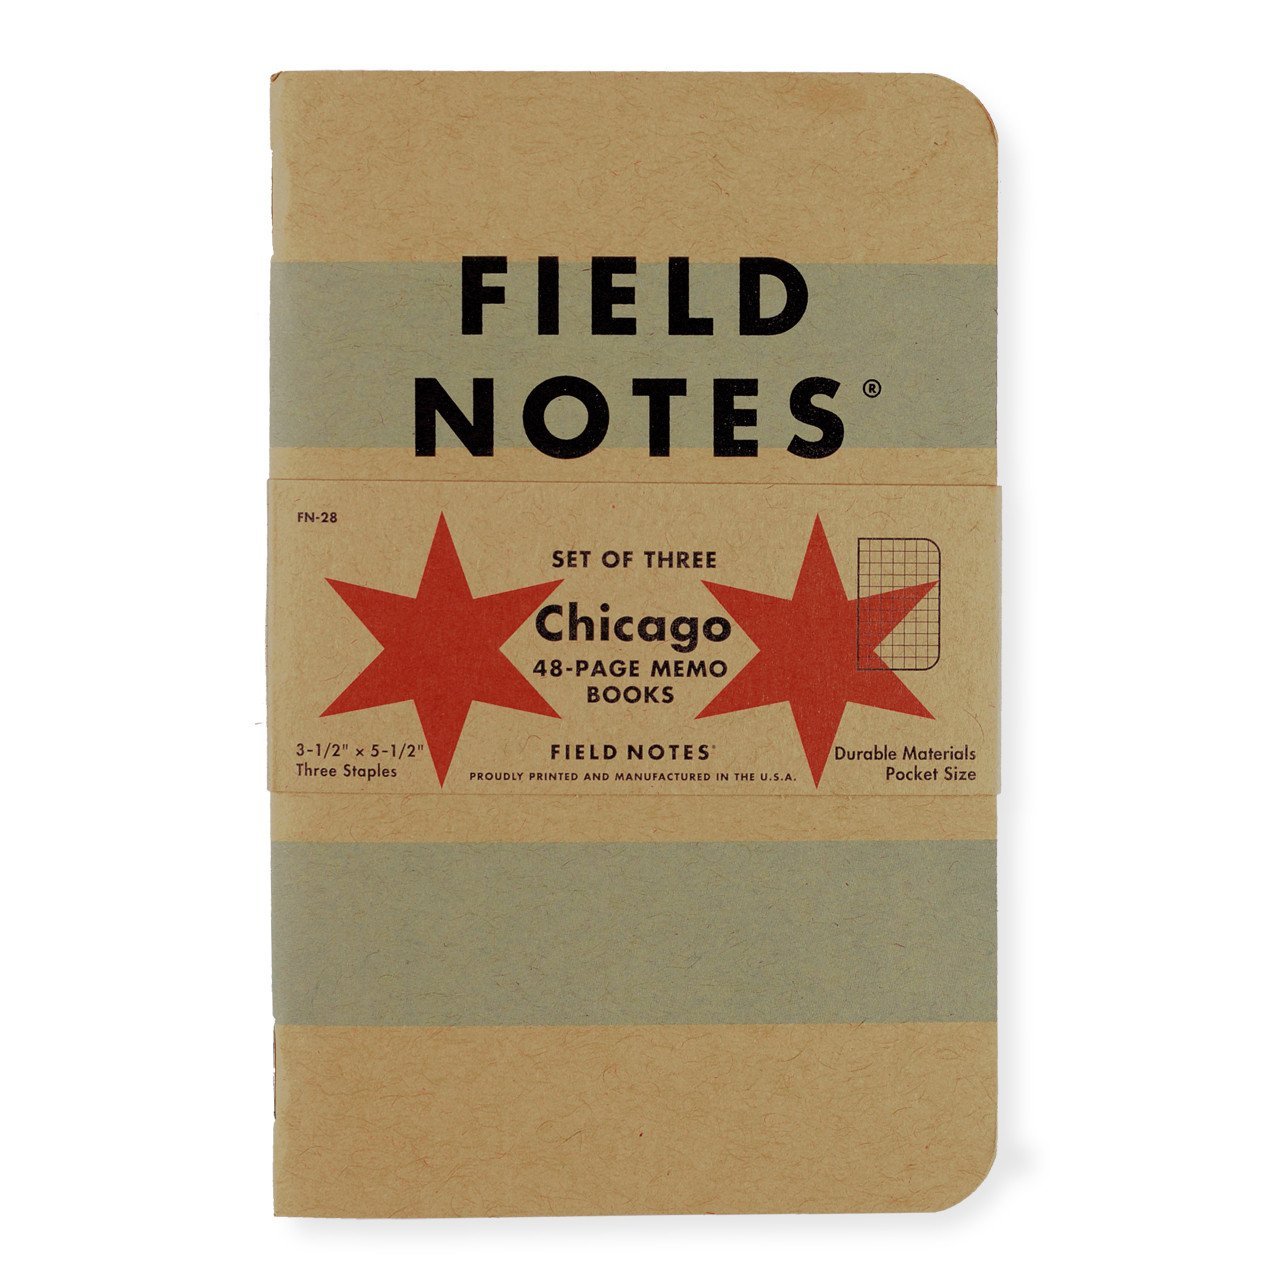 Field Notes Chicago Edition Grid Notebook Set Of Three 